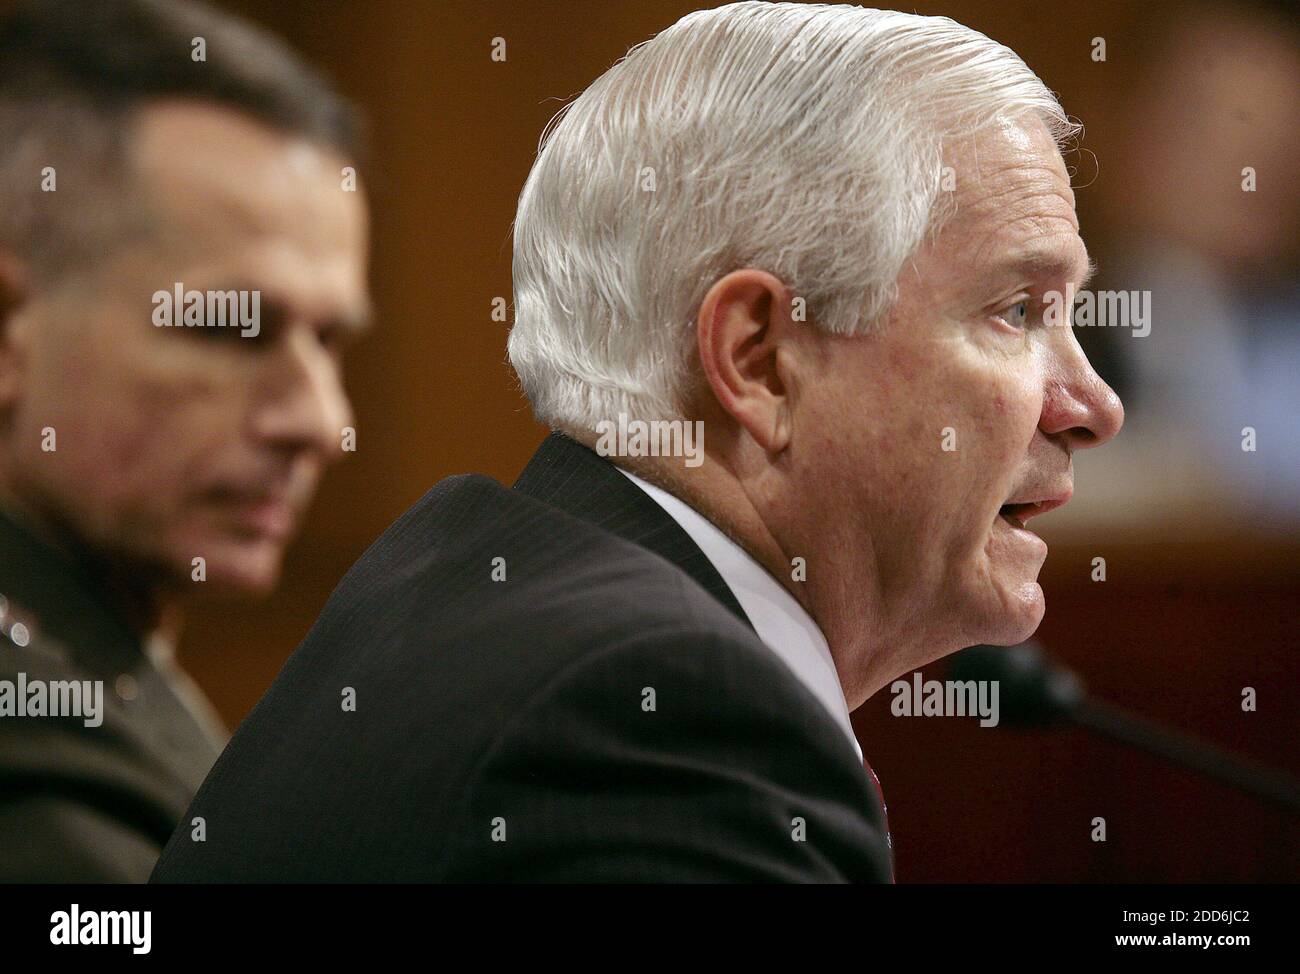 NO FILM, NO VIDEO, NO TV, NO DOCUMENTARY - Defense Secretary Robert Gates, foreground, and General Peter Pace meet on Capitol Hill in Washington, D.C., USA on January 12, 2007, before the Senate Armed Services Committee. Photo by Chuck Kennedy/MCT/ABACAPRESS.COM Stock Photo